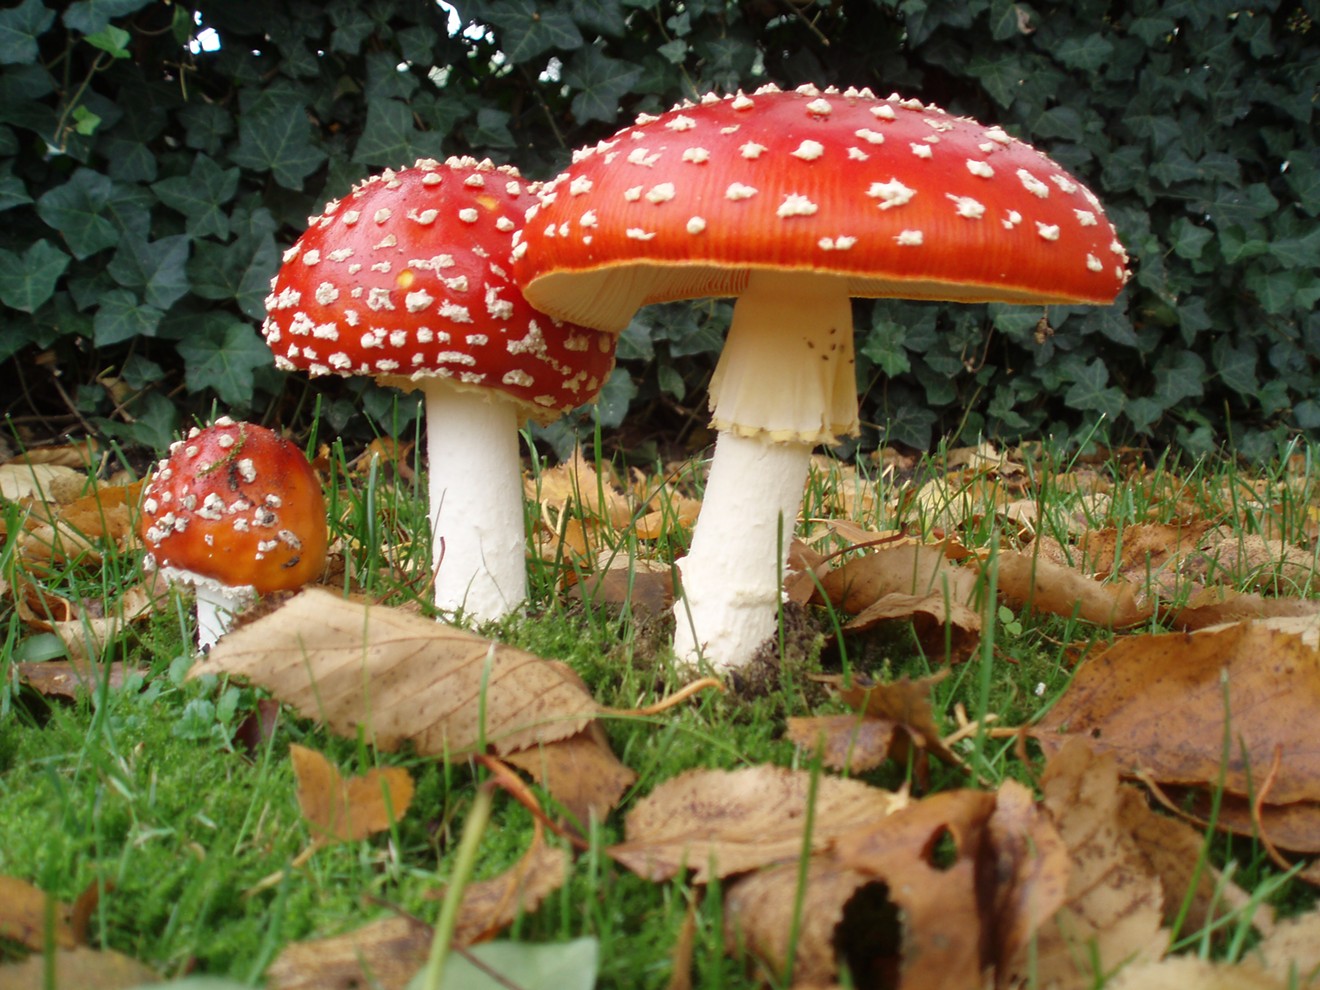 What are the advantages of having magic mushrooms